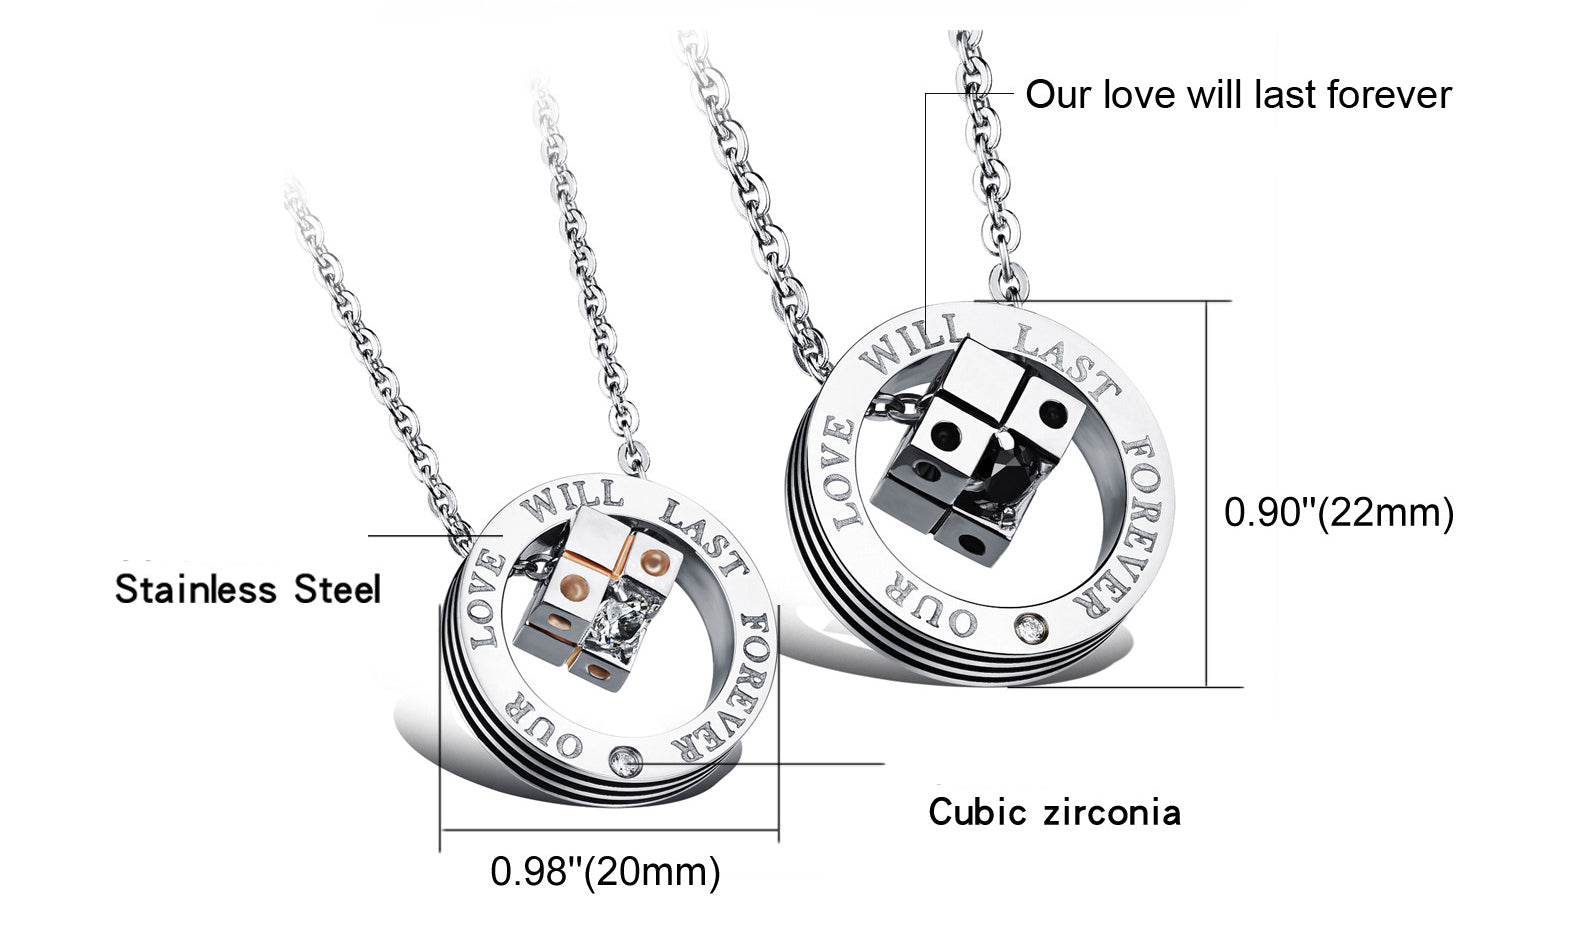 Crystal Cube Couple Necklace